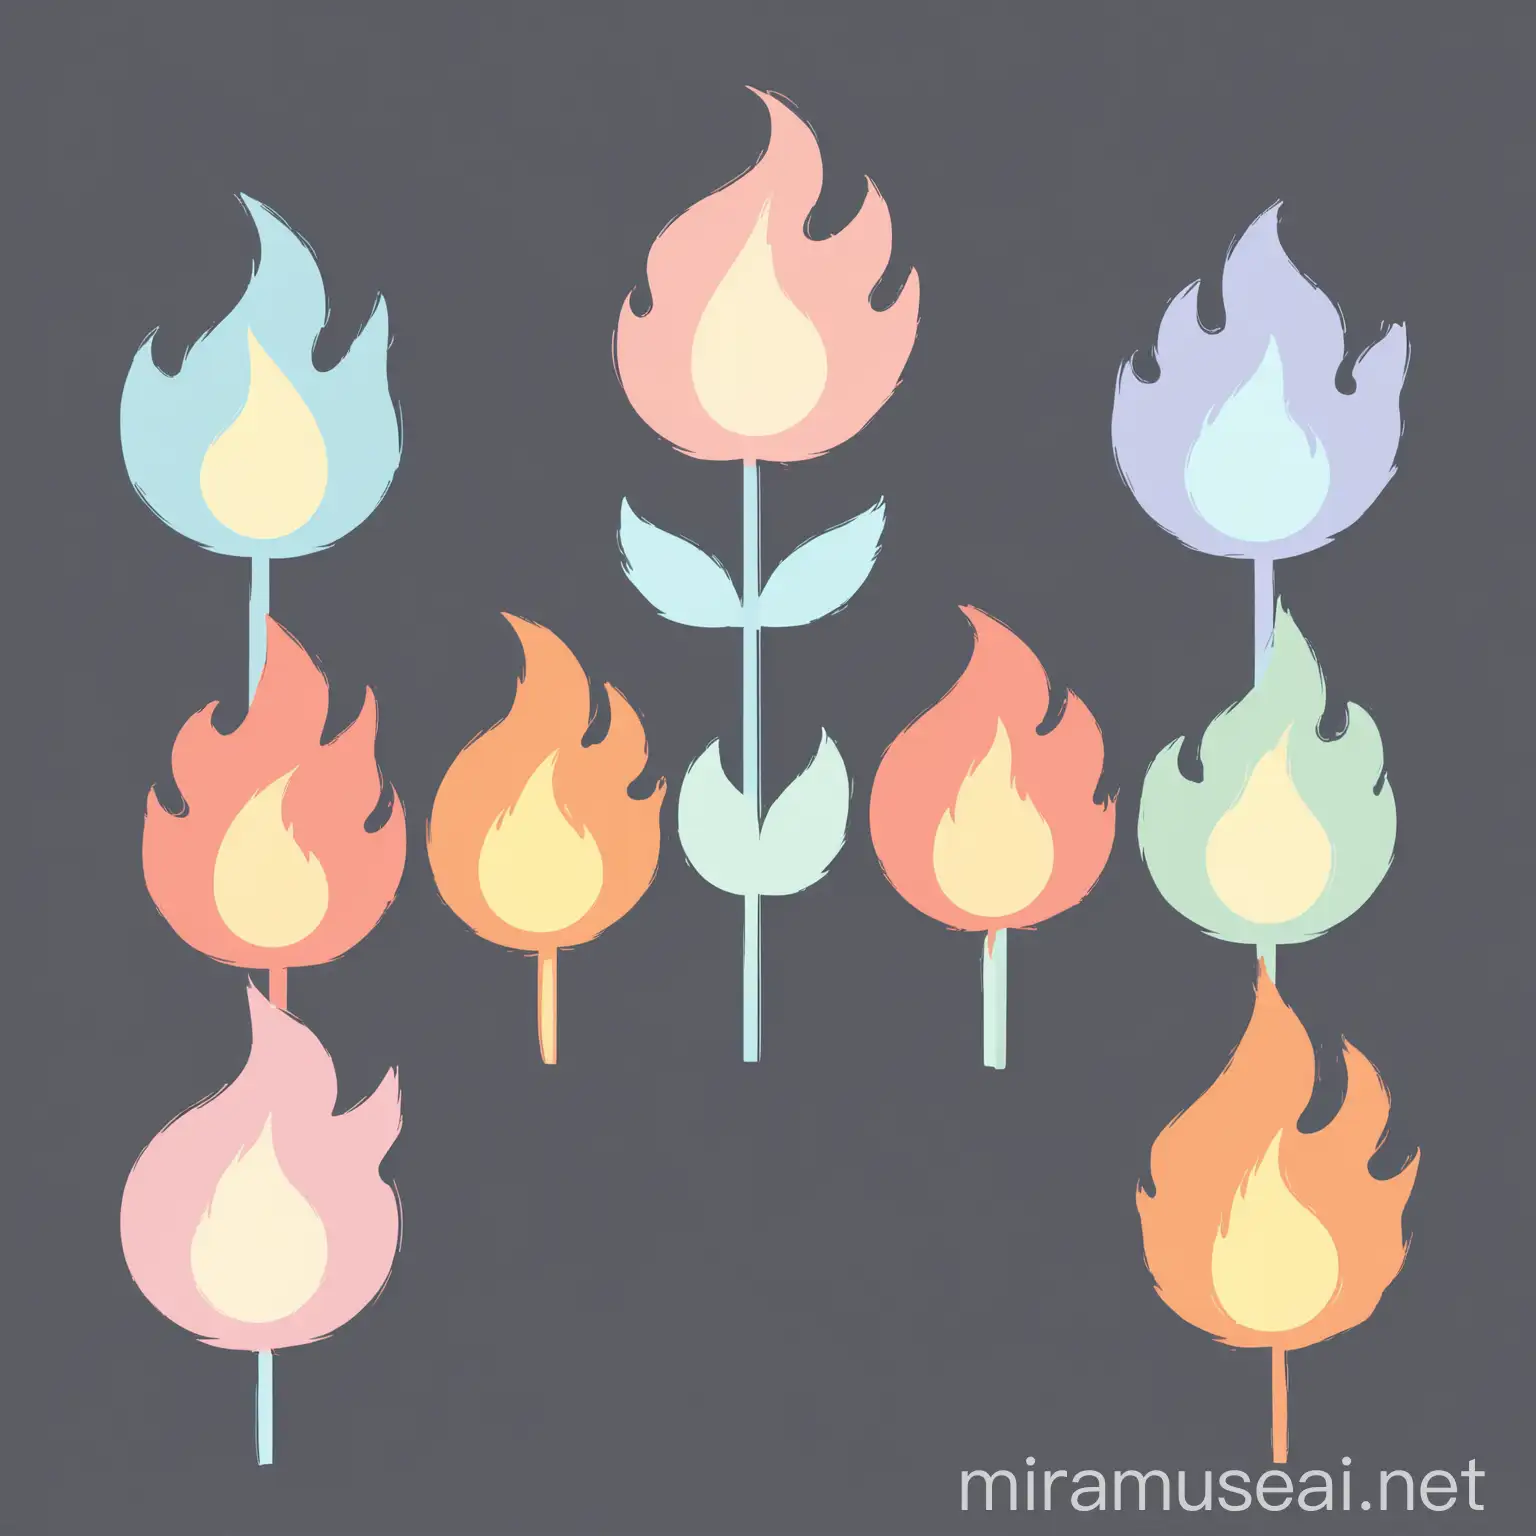 Simple Flower and Fire Vector Illustration